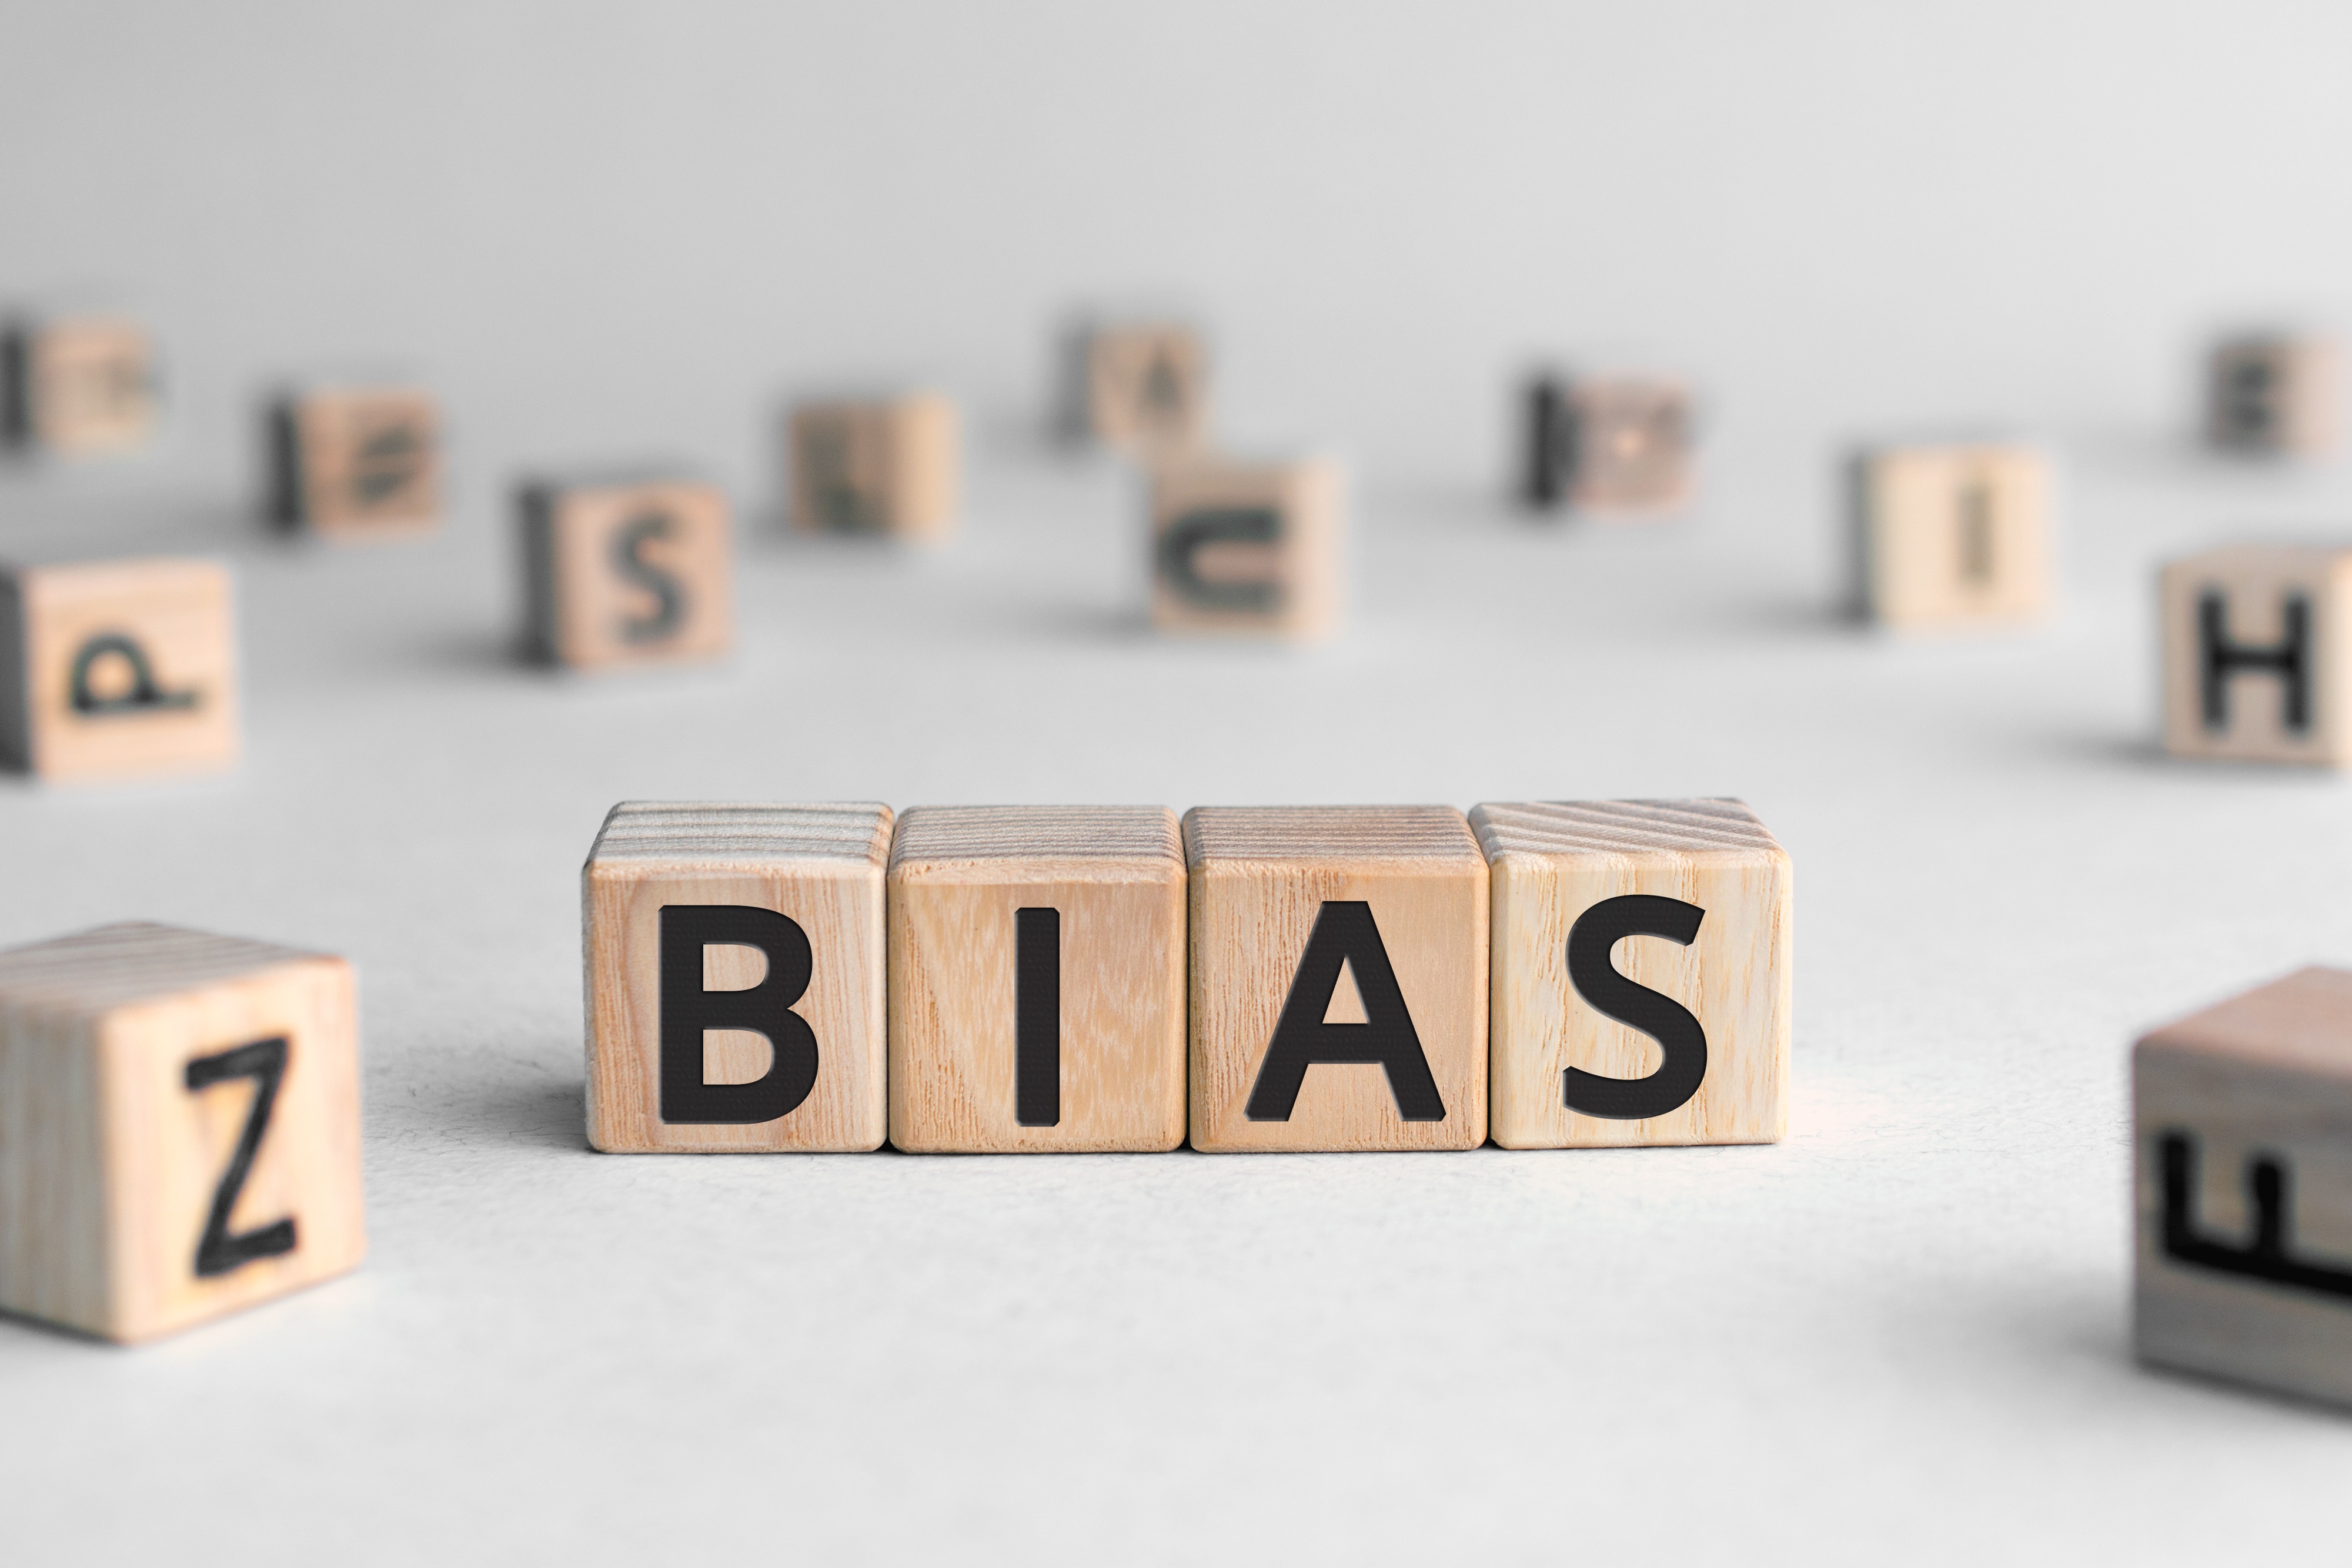 Busting bias: what works and what doesn’t